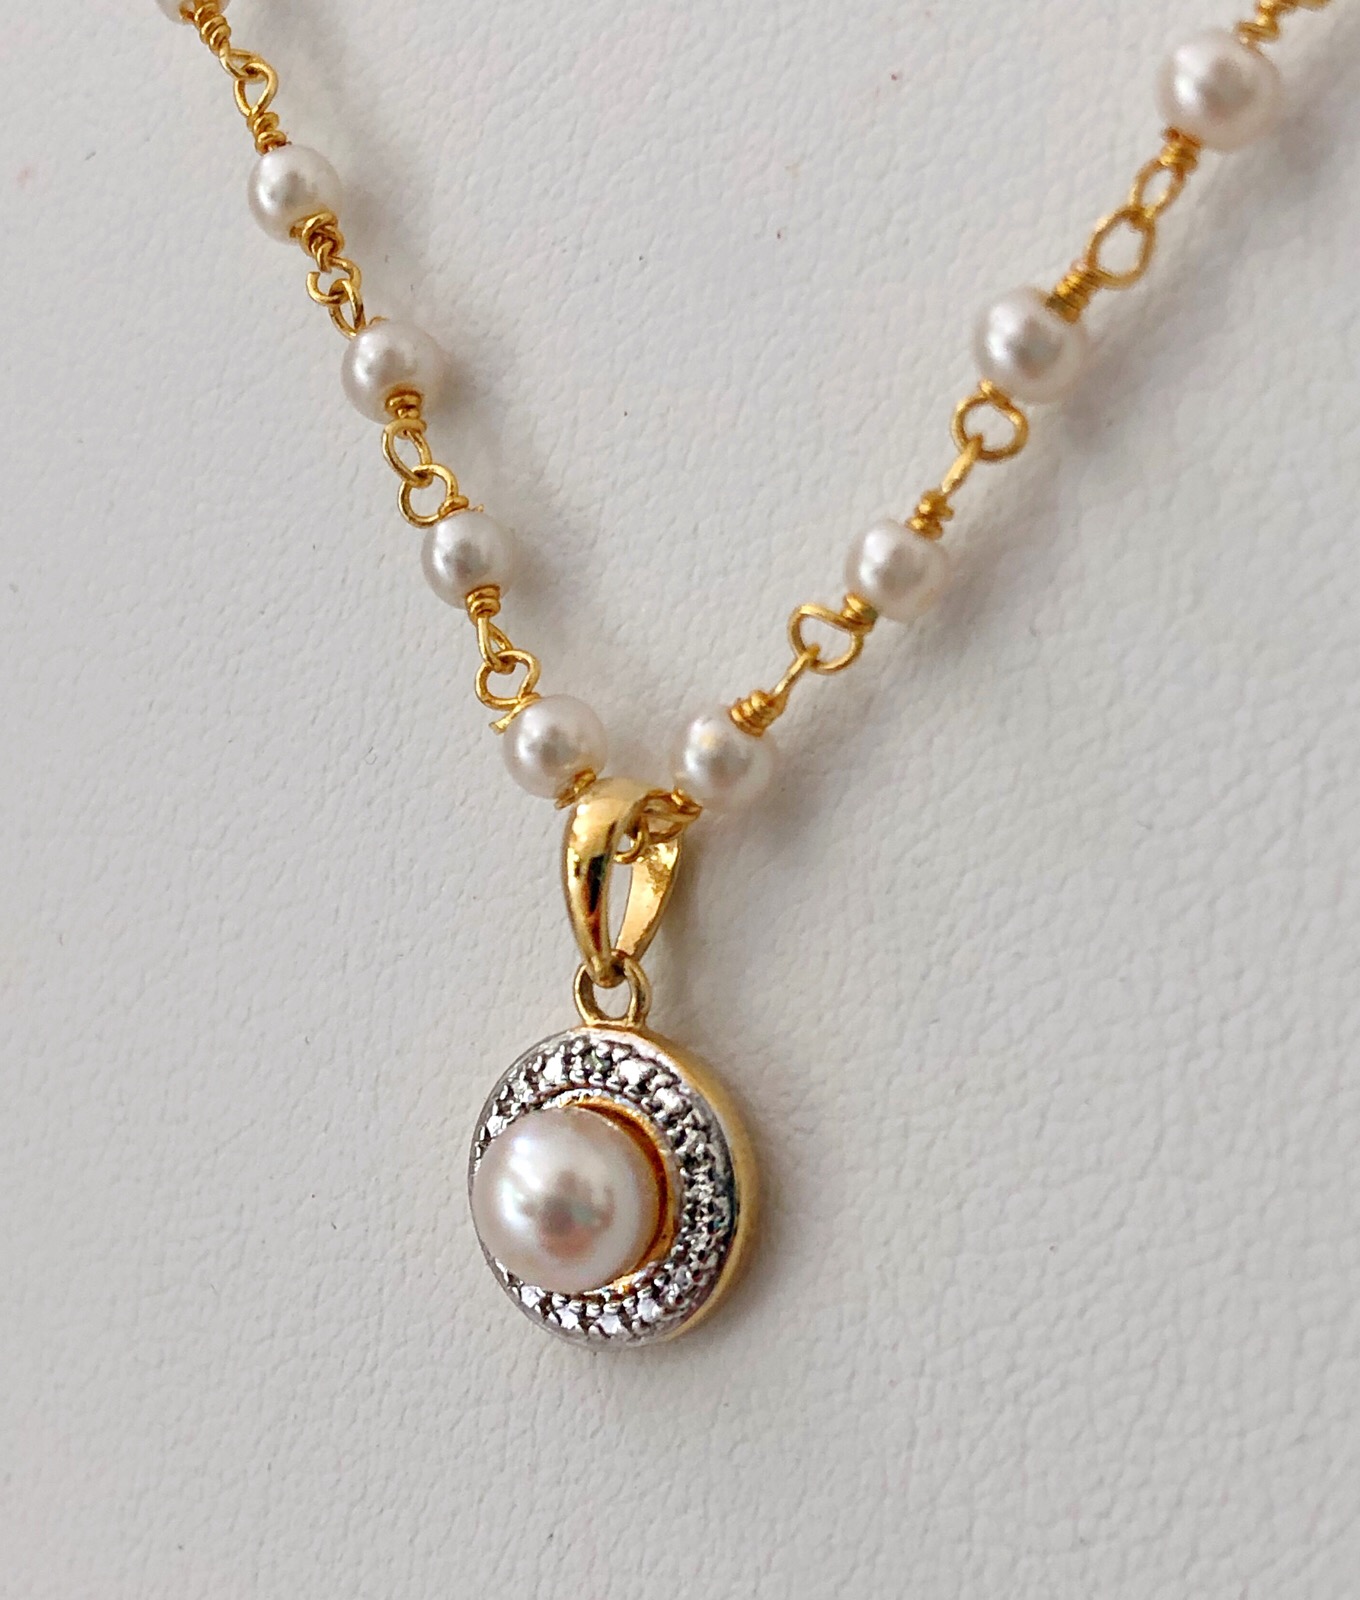 Only Yours Jewelry - Fresh Water Pearl and Gold Plate Necklace